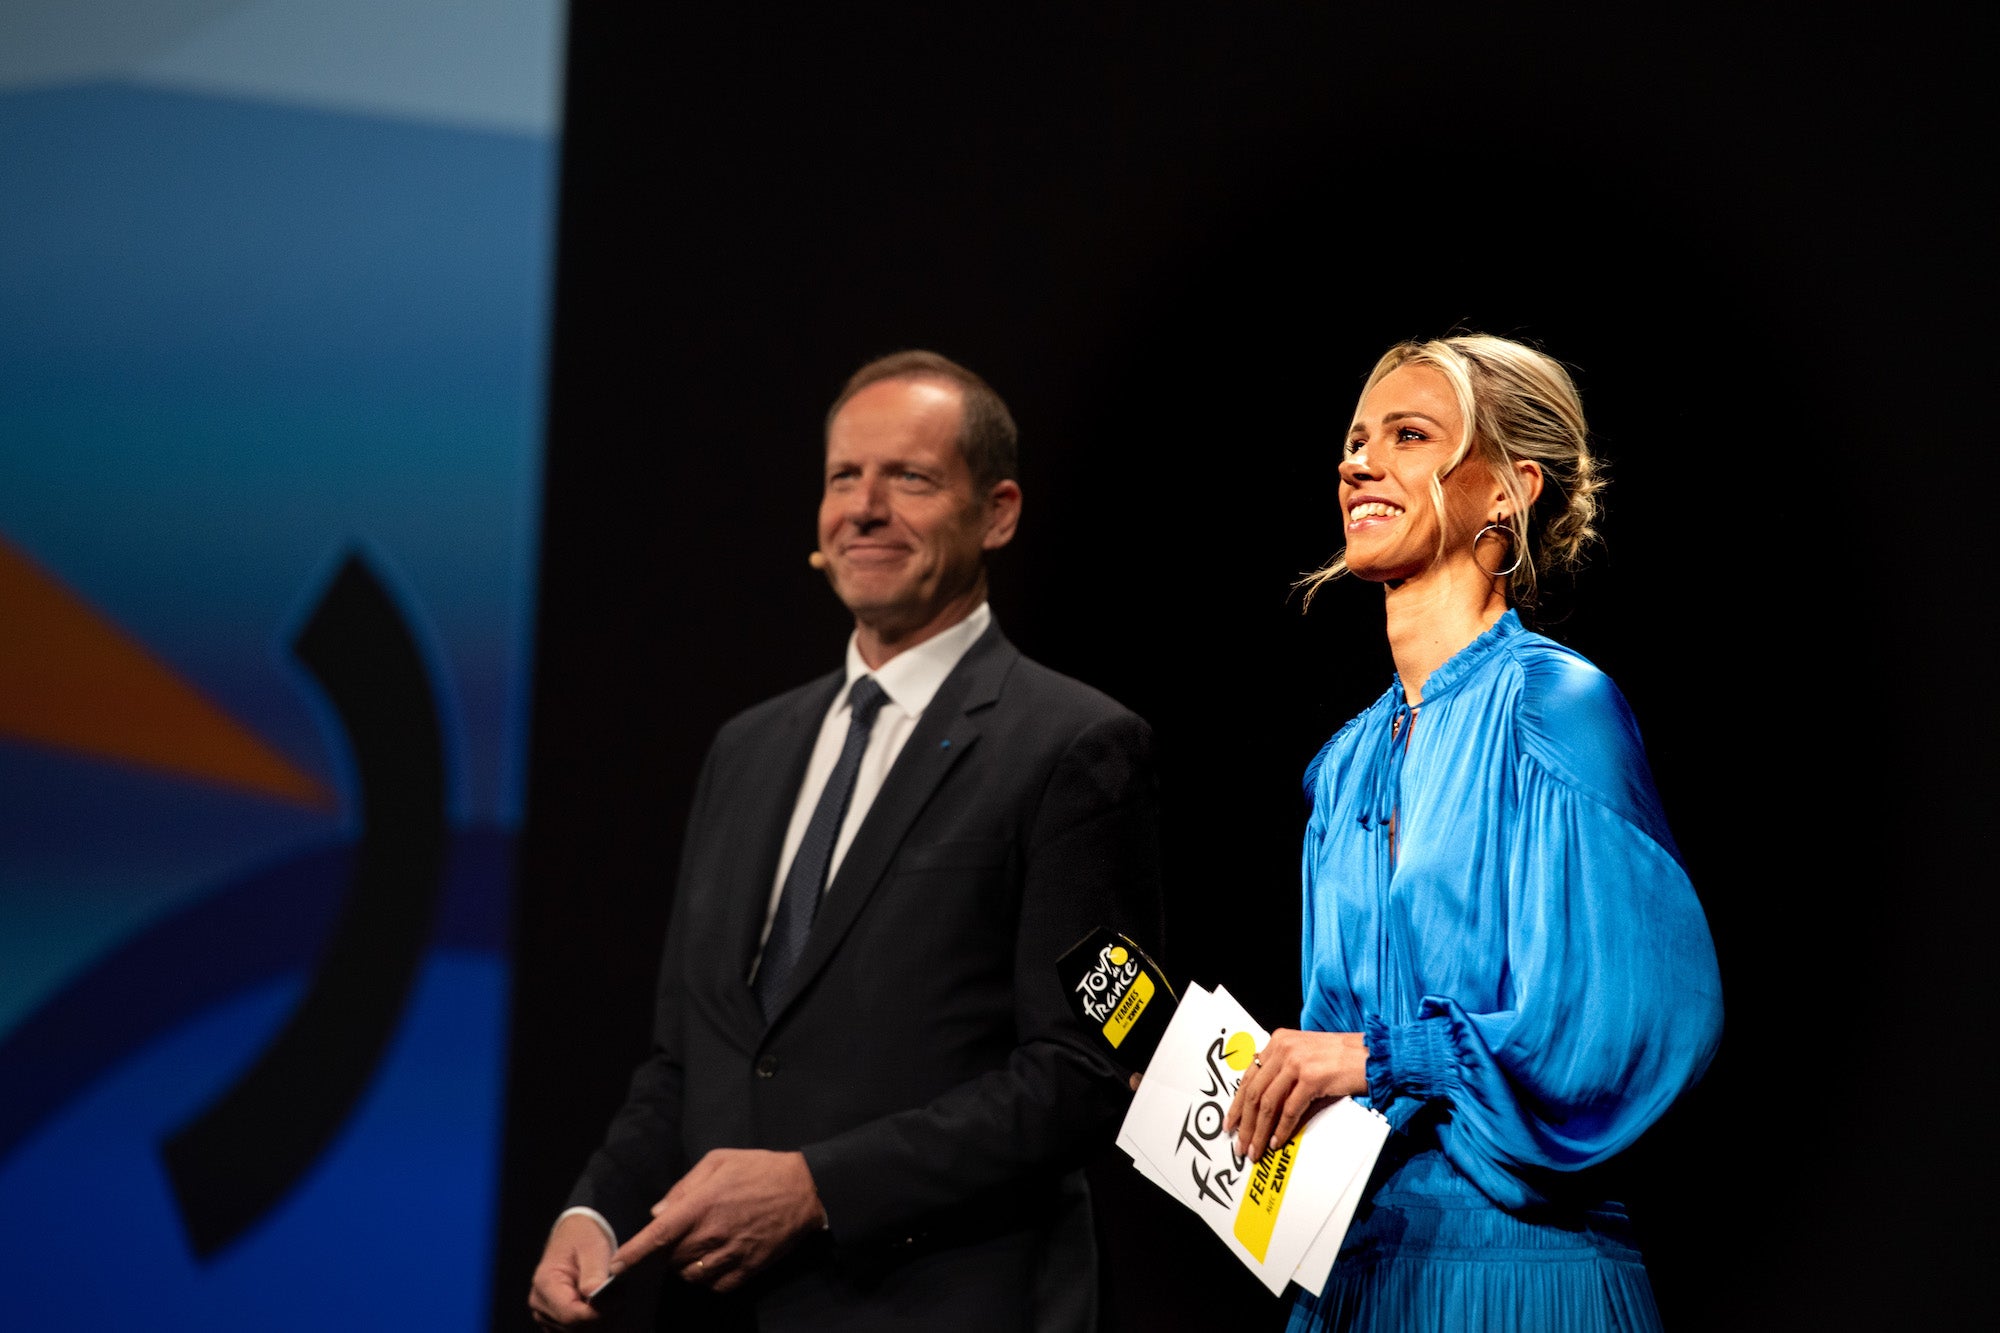 Christian Prudhomme and Marion Rousse